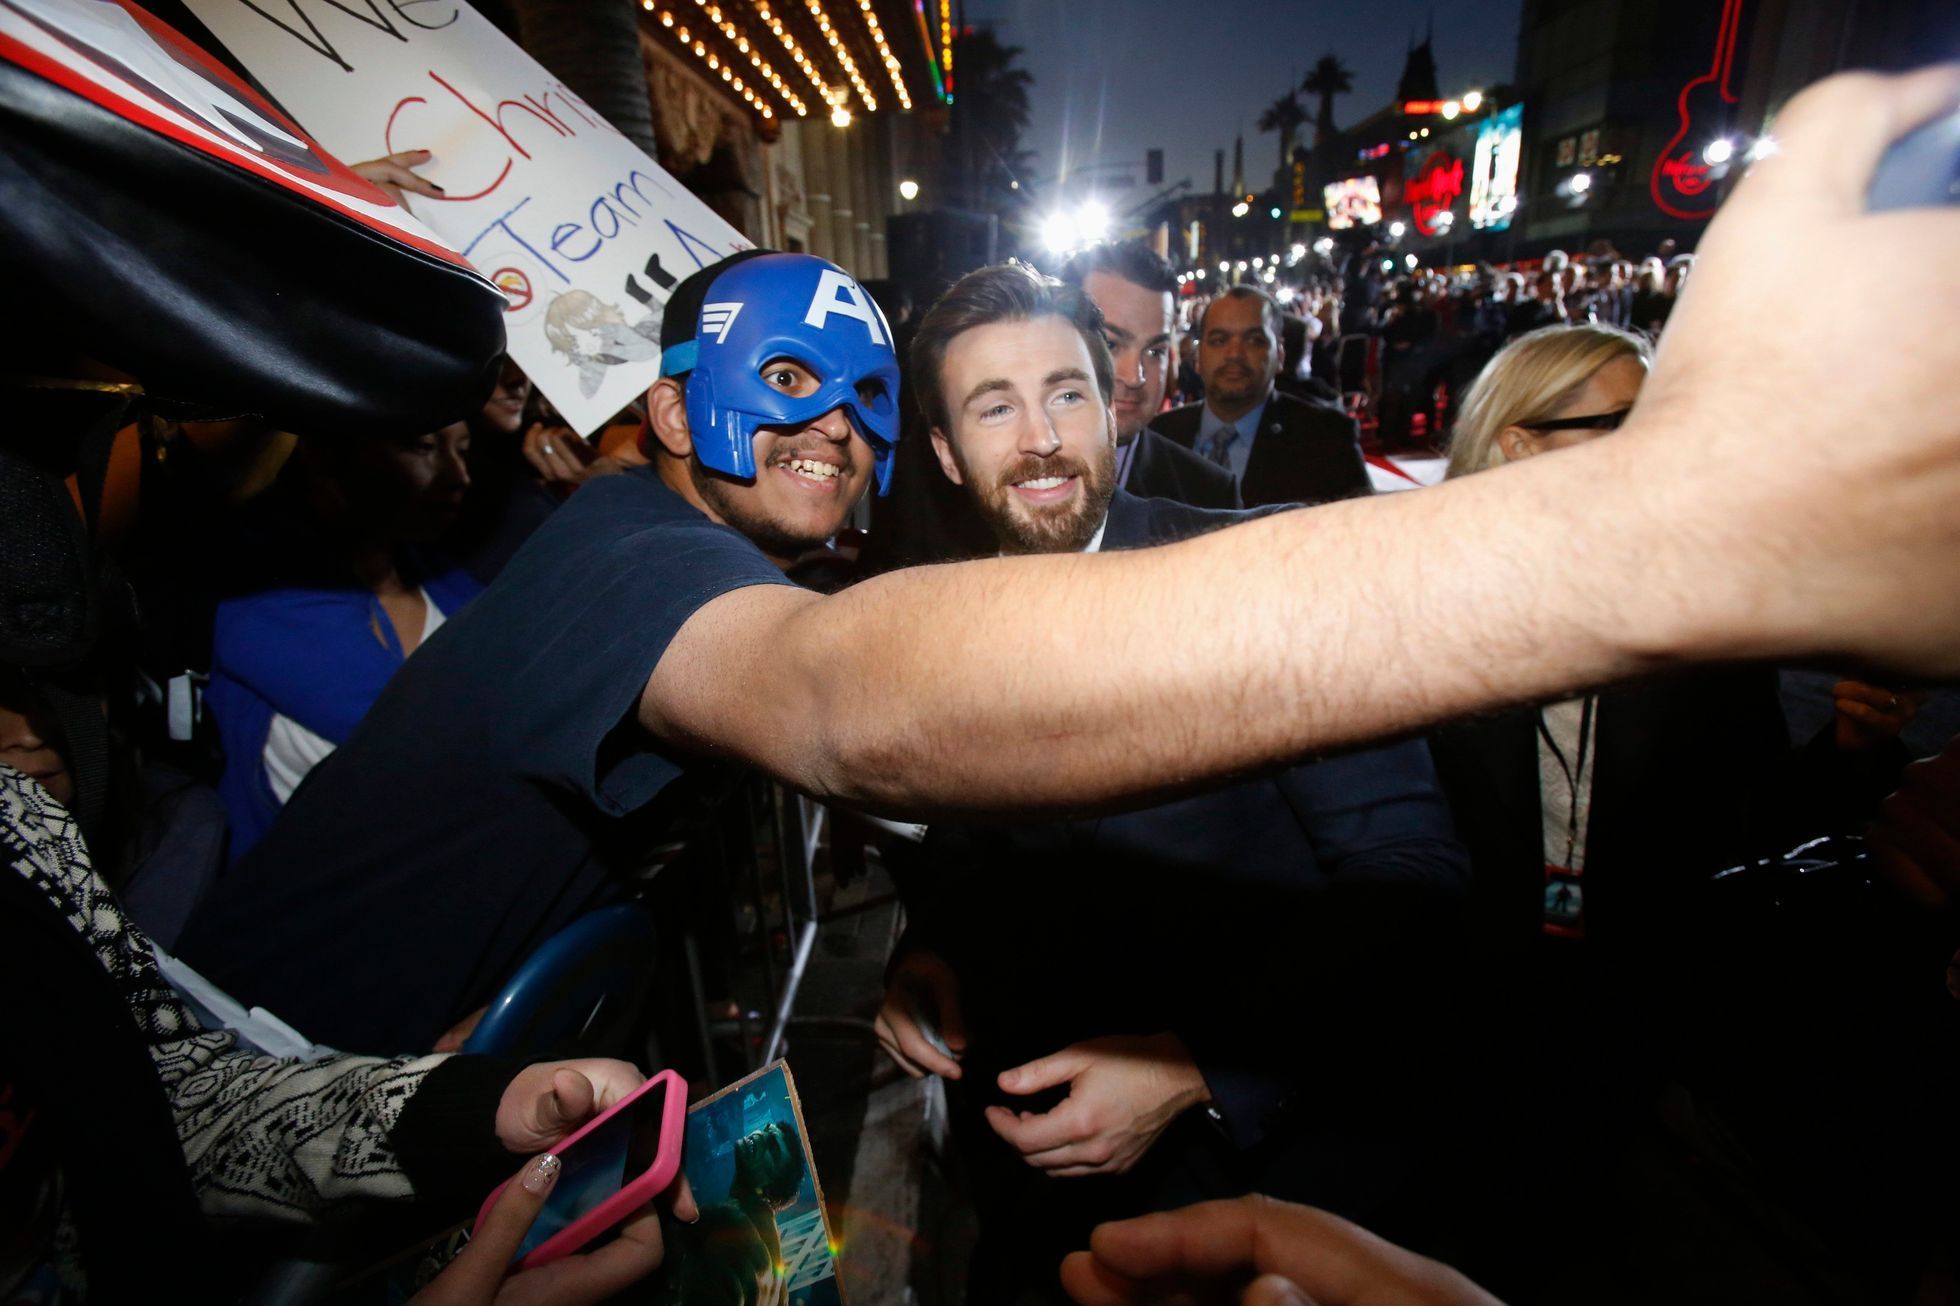 Cast member Evans poses with a fan at the premiere of &quot;Captain America: The Winter Soldier&quot; in Hollywood